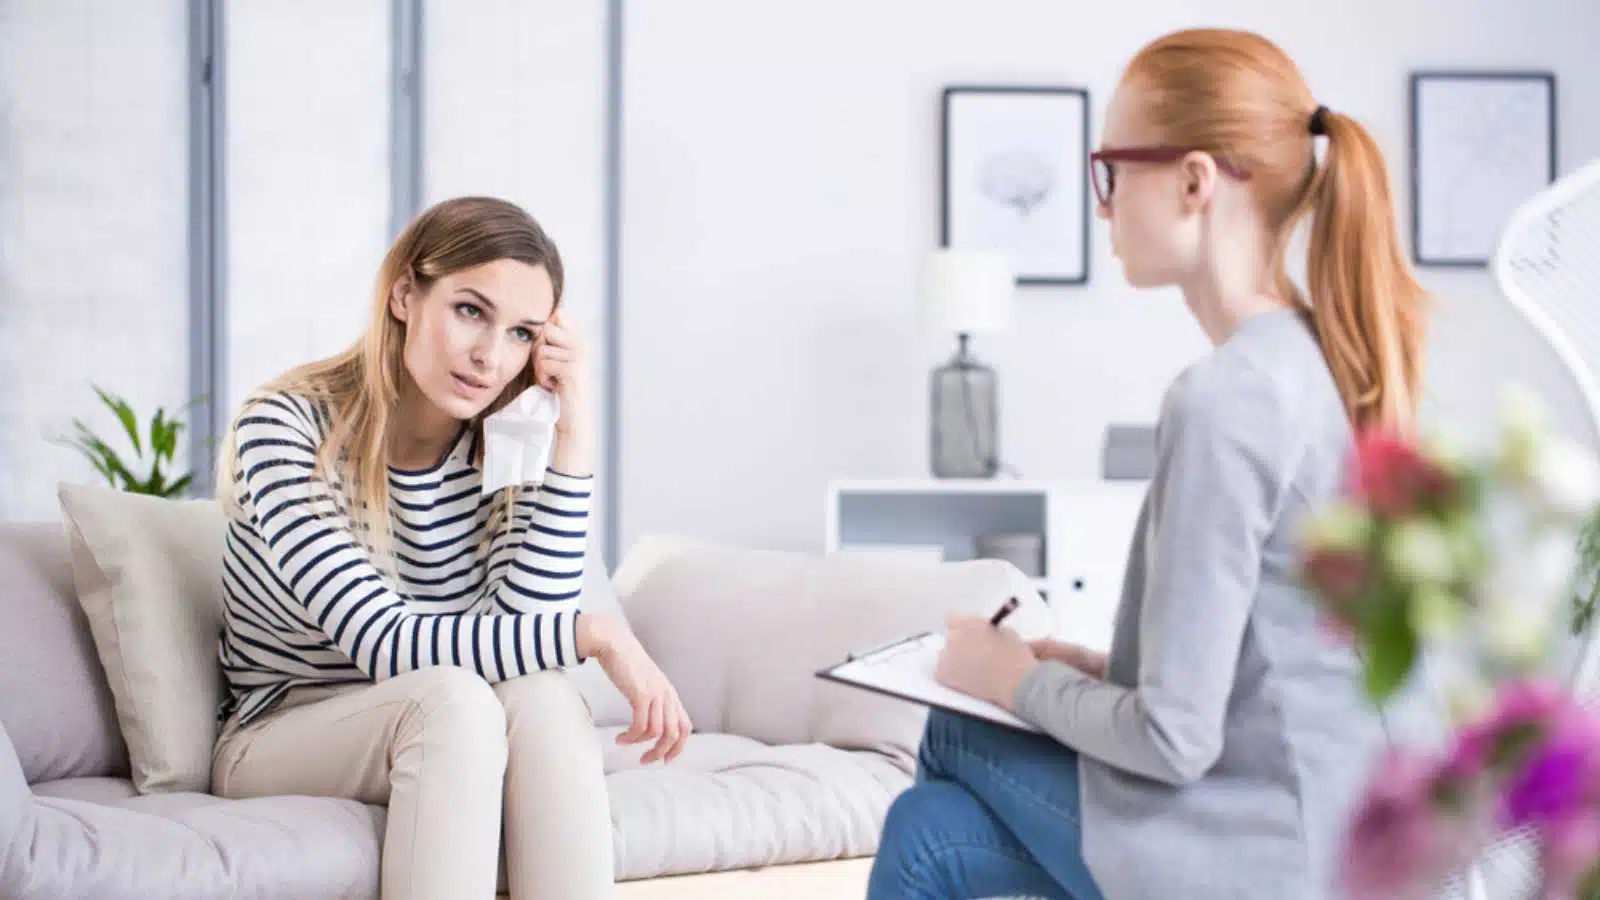 10 Inexpensive Ways To Deal With Trauma if You Don’t Have Money for Counseling